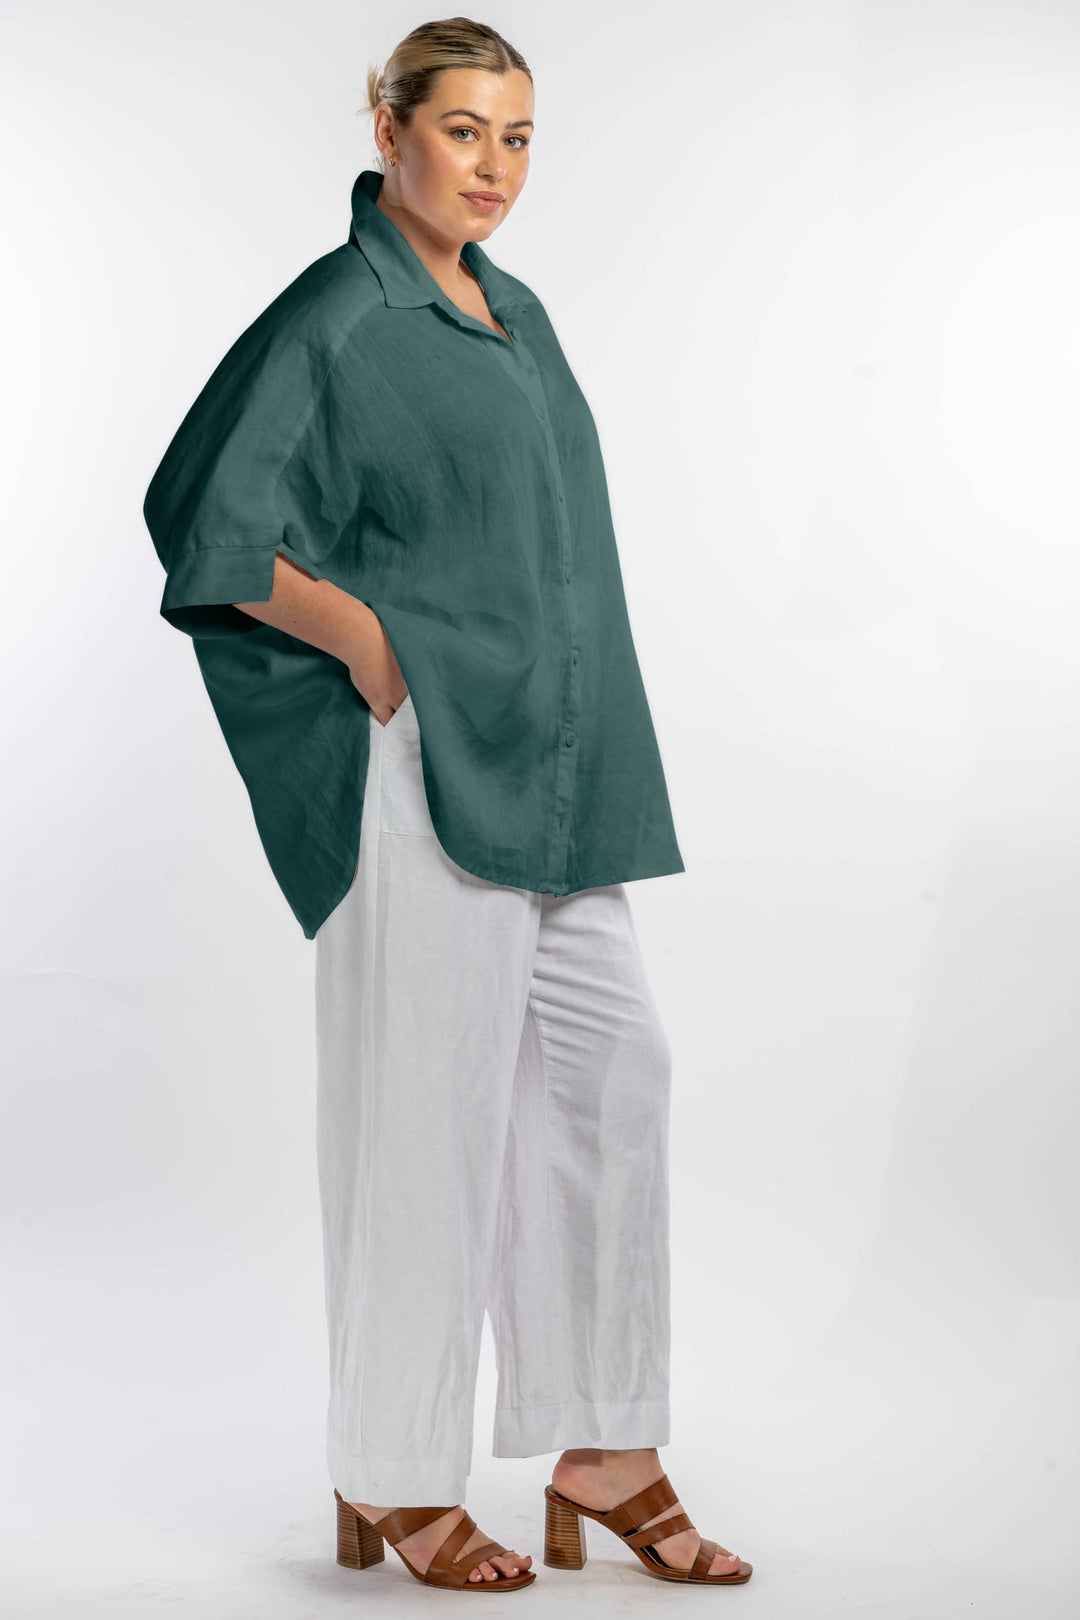 Come Together Oversized Shirt - Teal  - STOCK AVAILABLE - SIZE XS (12/14)